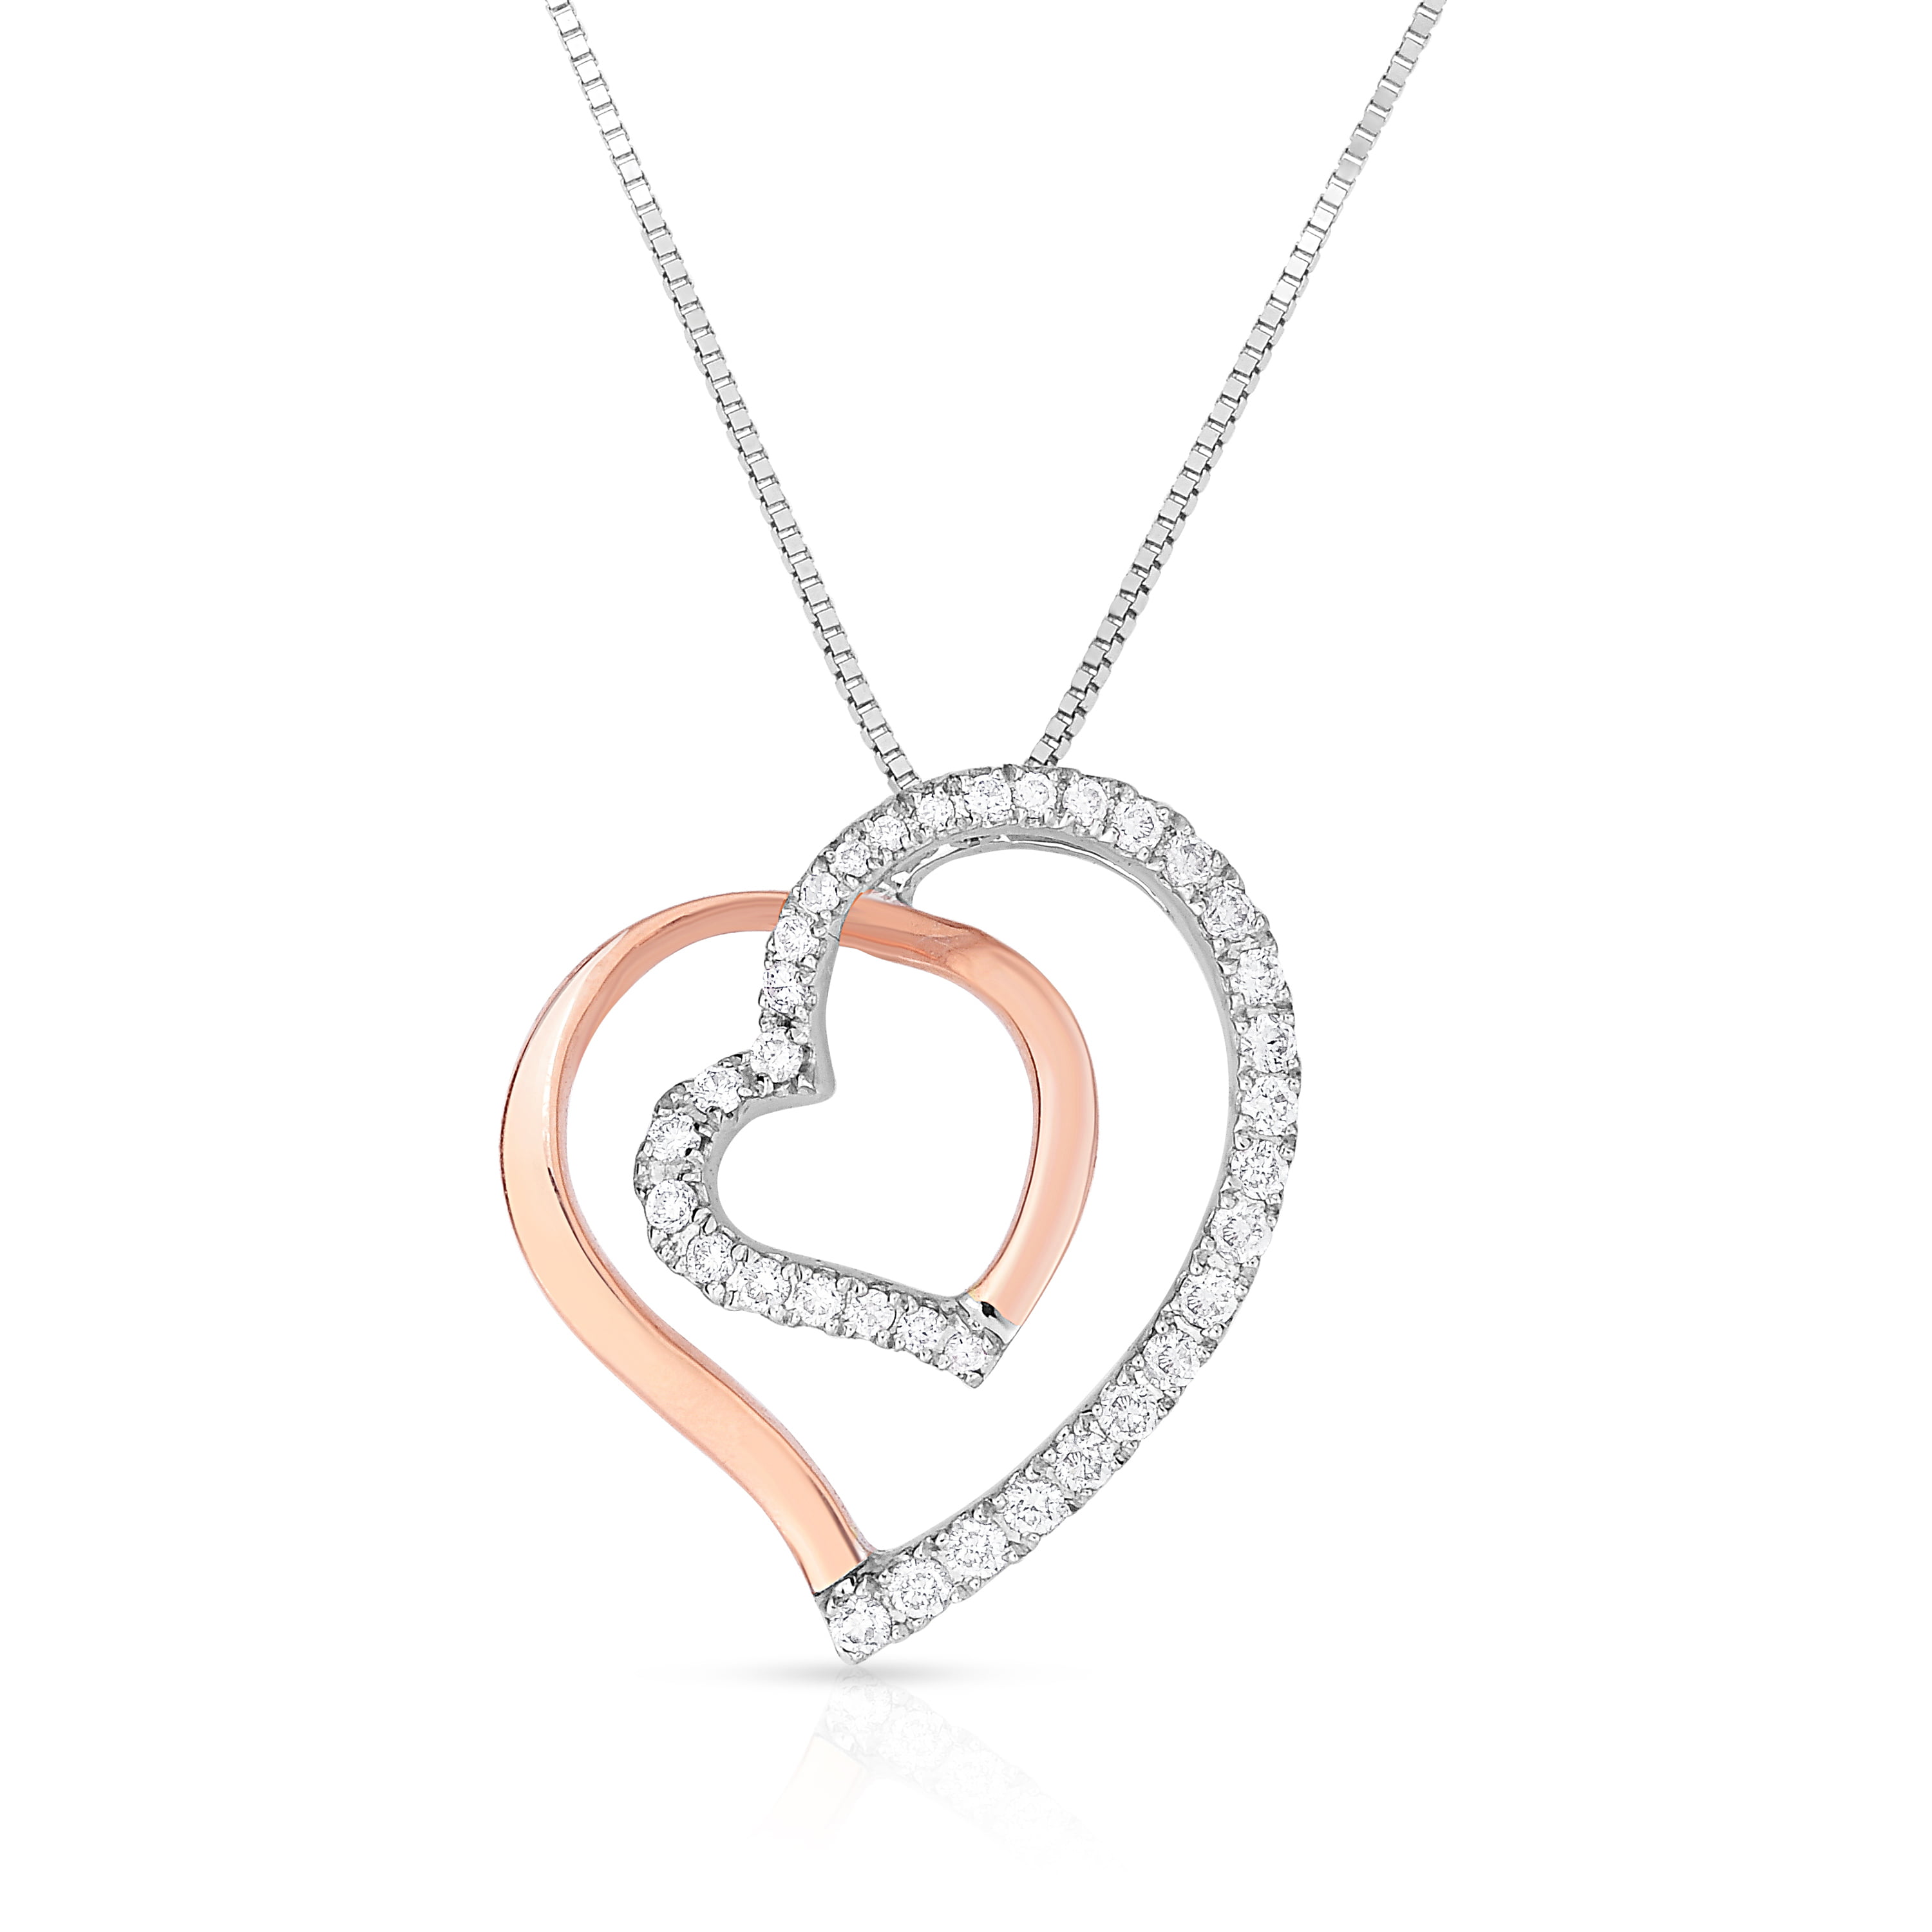 Double 3D Heart Pendant Necklace Real Natural Diamonds Real 10K White Gold 